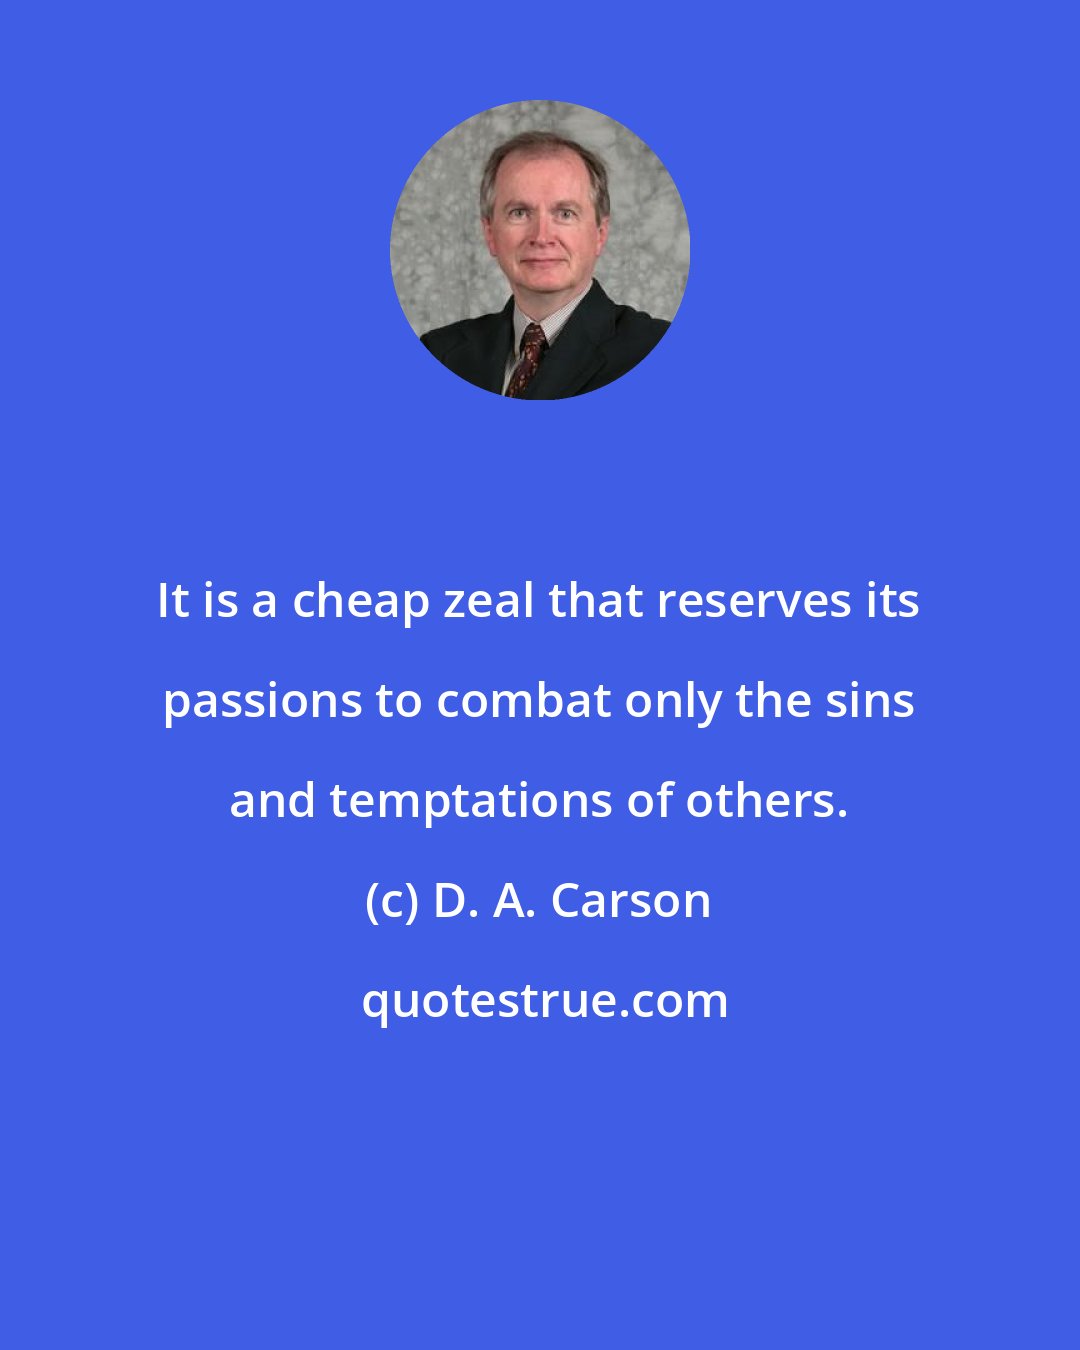 D. A. Carson: It is a cheap zeal that reserves its passions to combat only the sins and temptations of others.